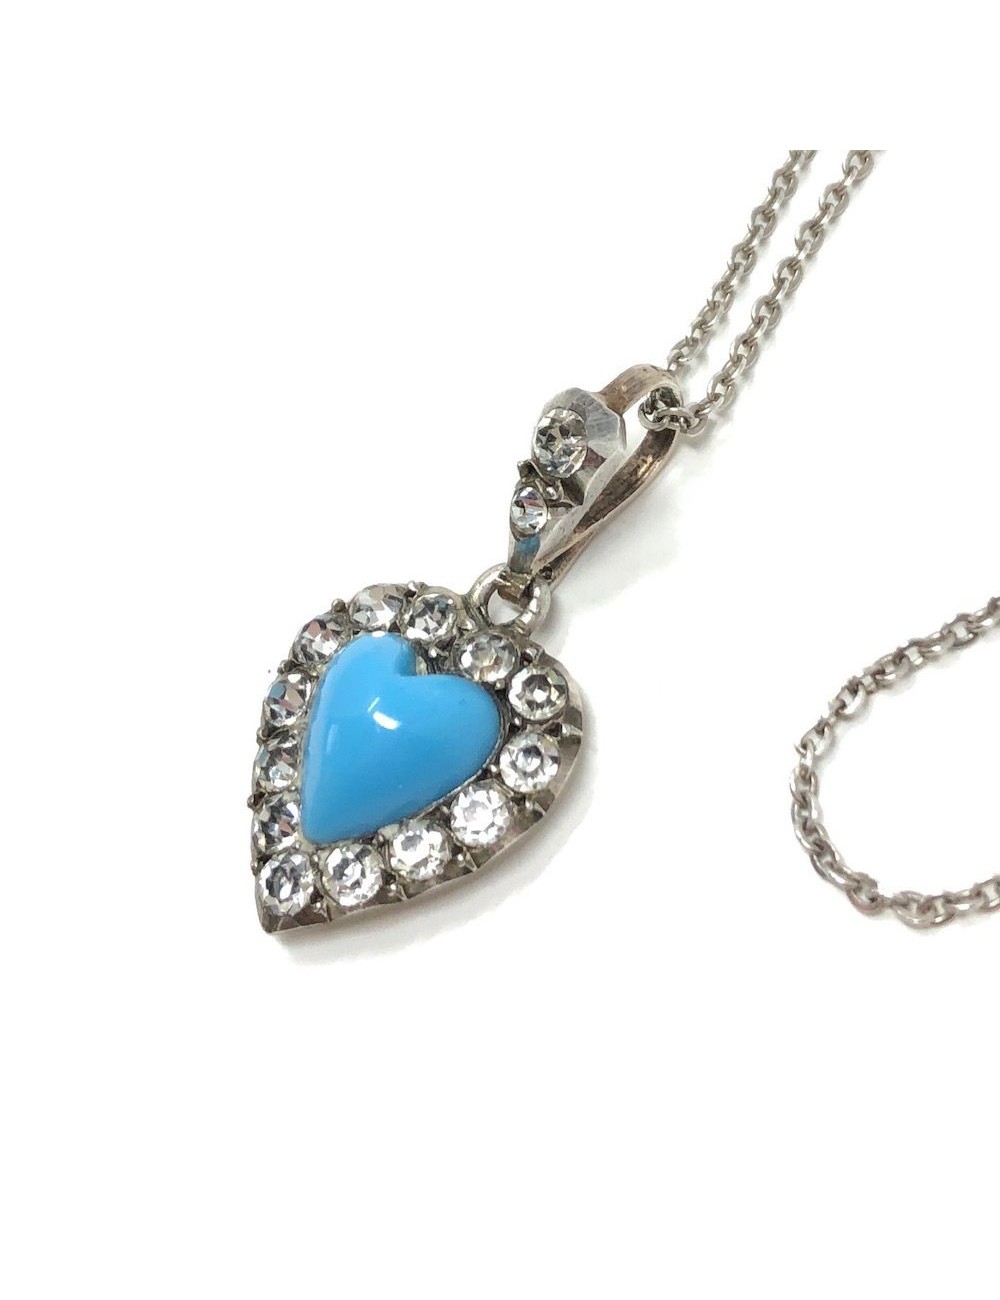 Long Silver Victorian Natural Turquoise Necklace | 843725 |  Sellingantiques.co.uk